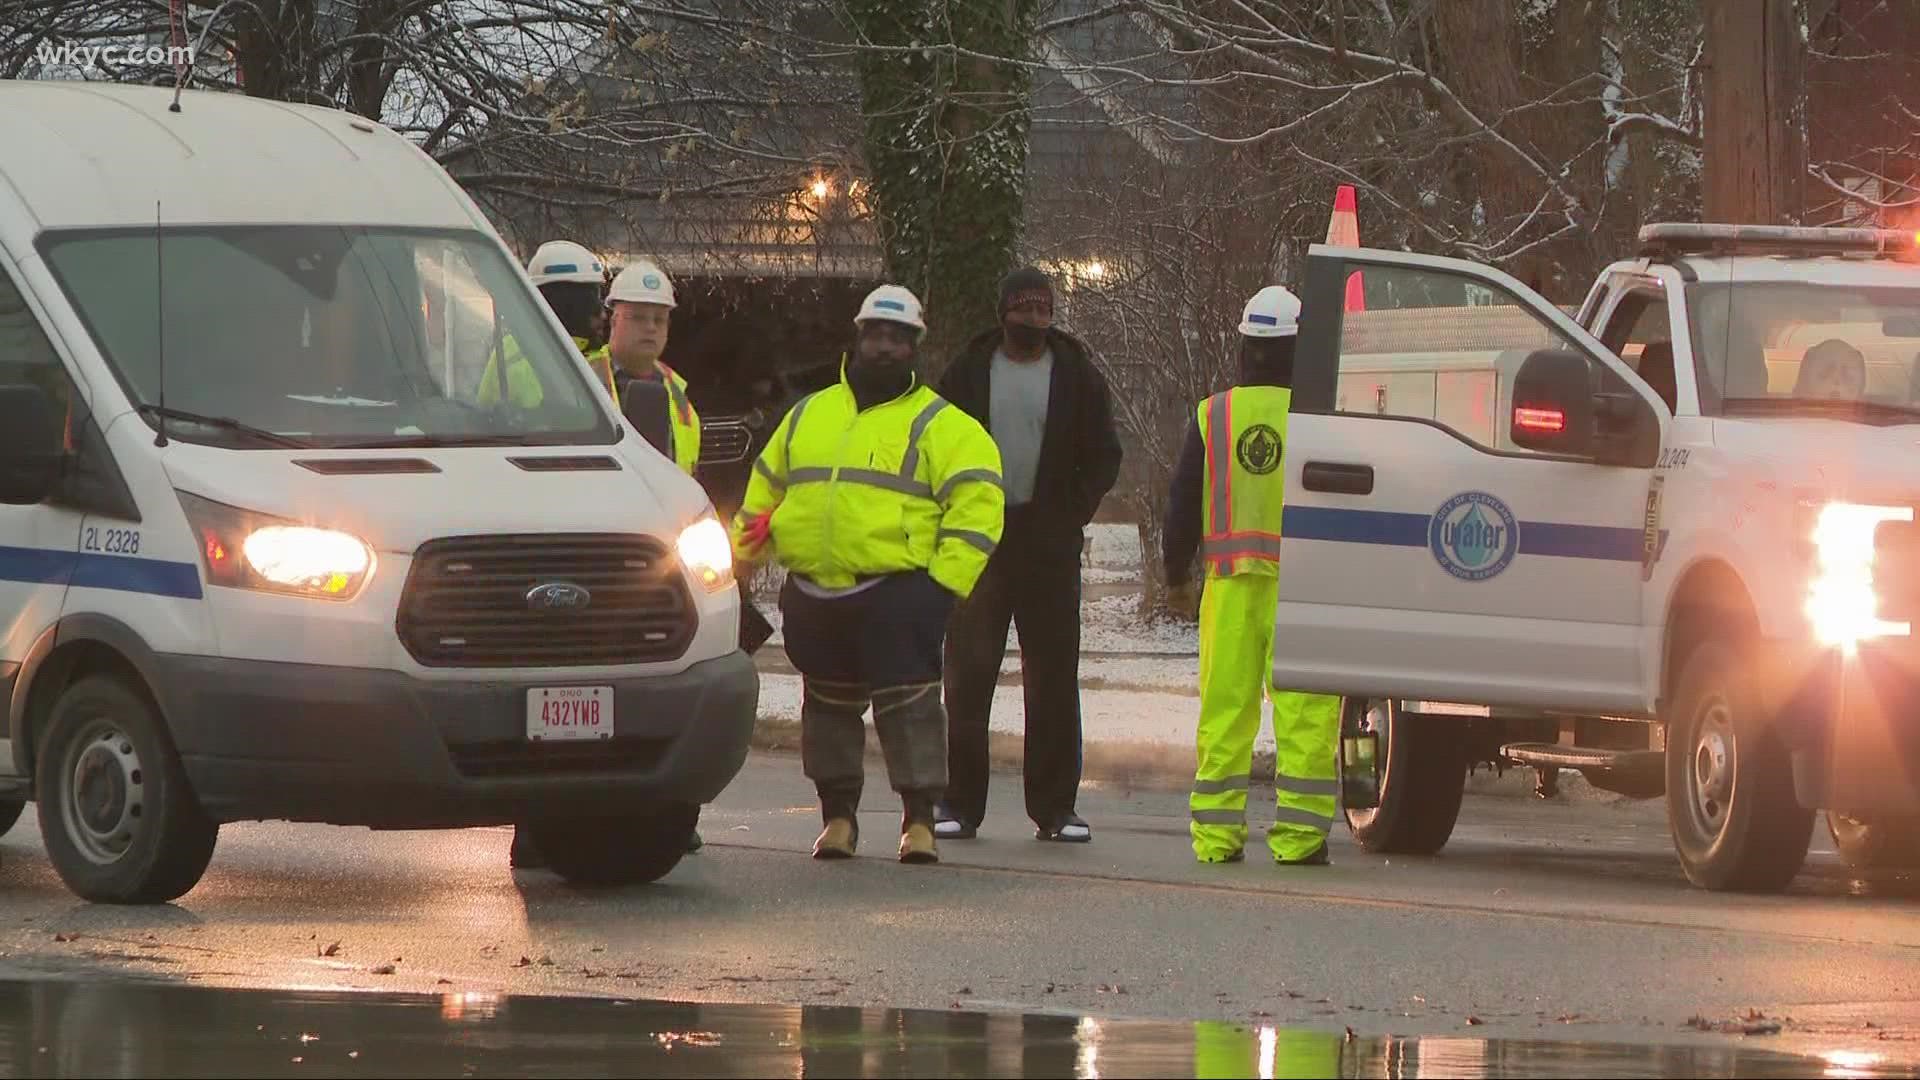 Cleveland Water confirms that this is at least the second break in the area in two years. Because of the number of breaks, they're working on a permanent solution